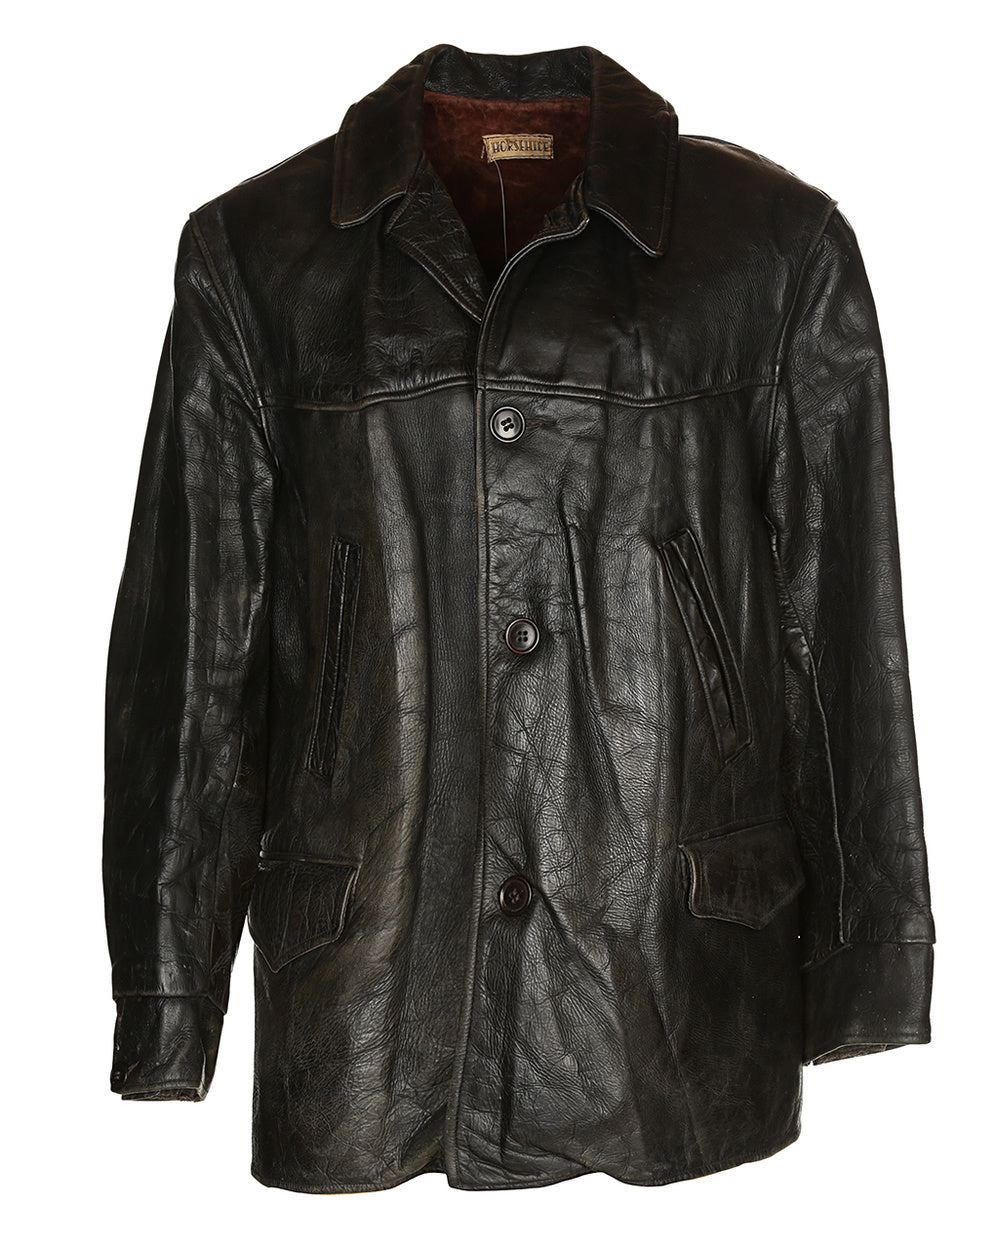 30s/40s Brown Horsehide Leather Jacket - C48